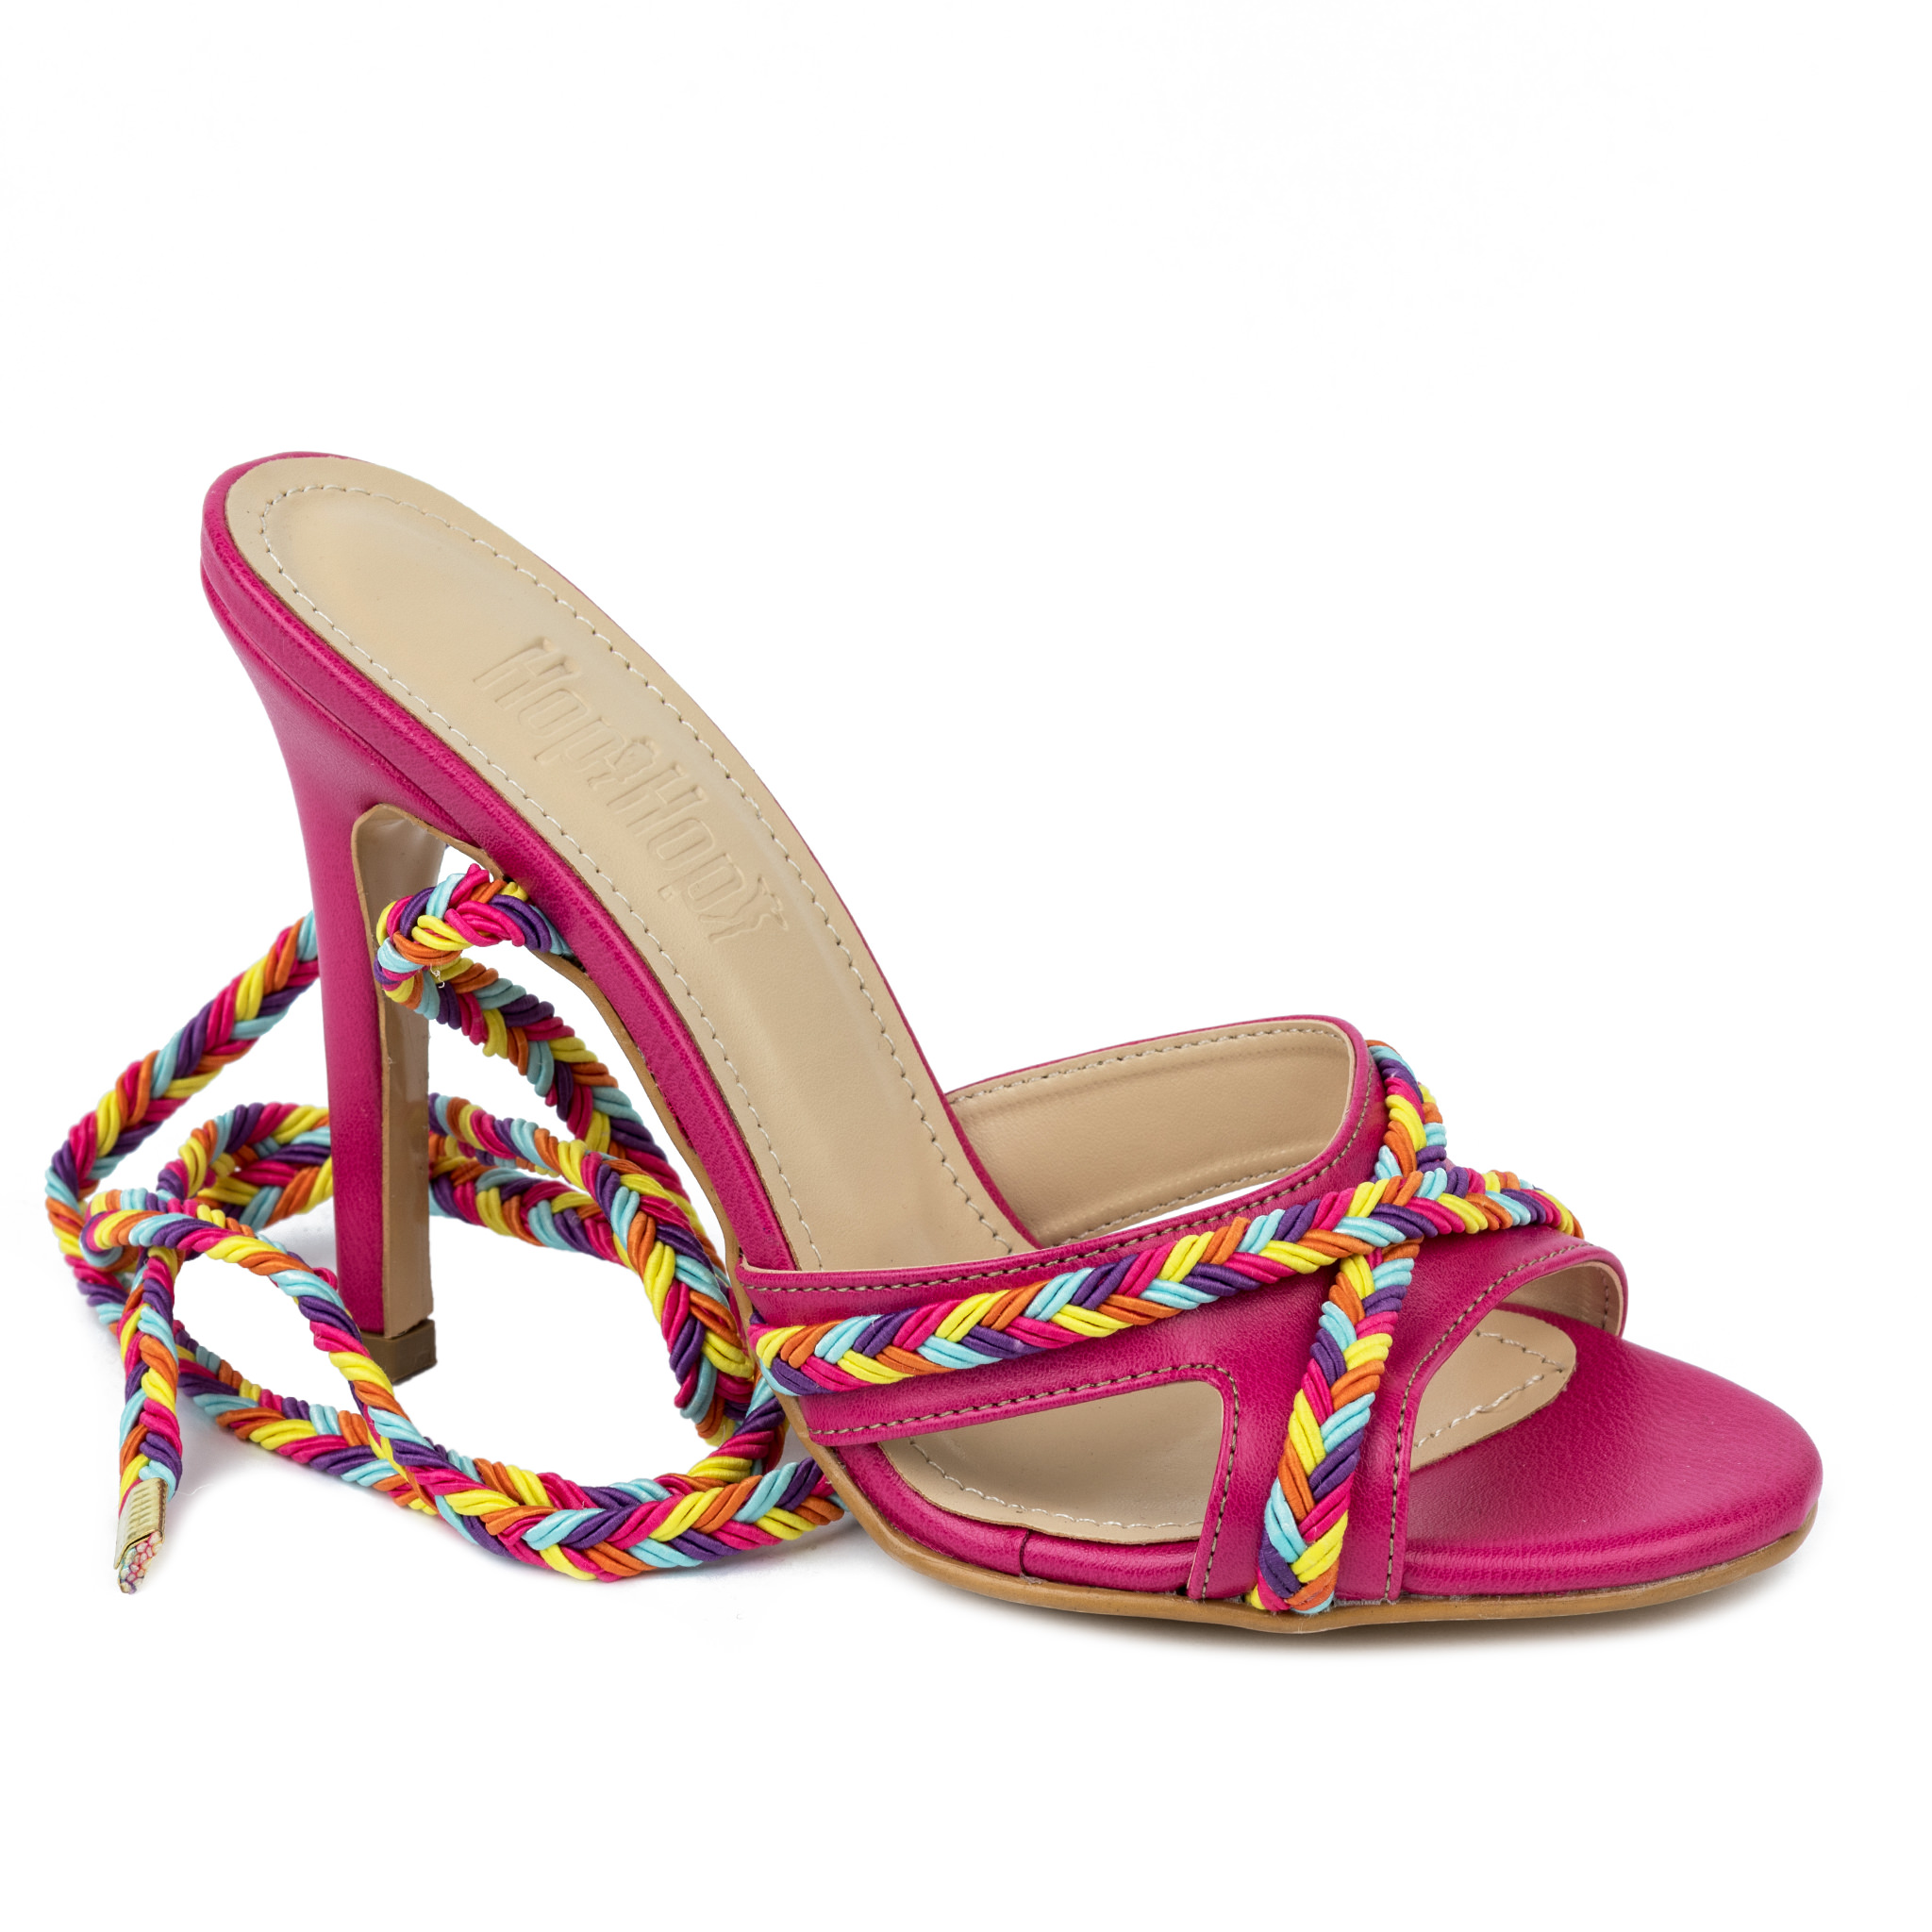 LACE UP SANDALS THIN HEEL - PINK